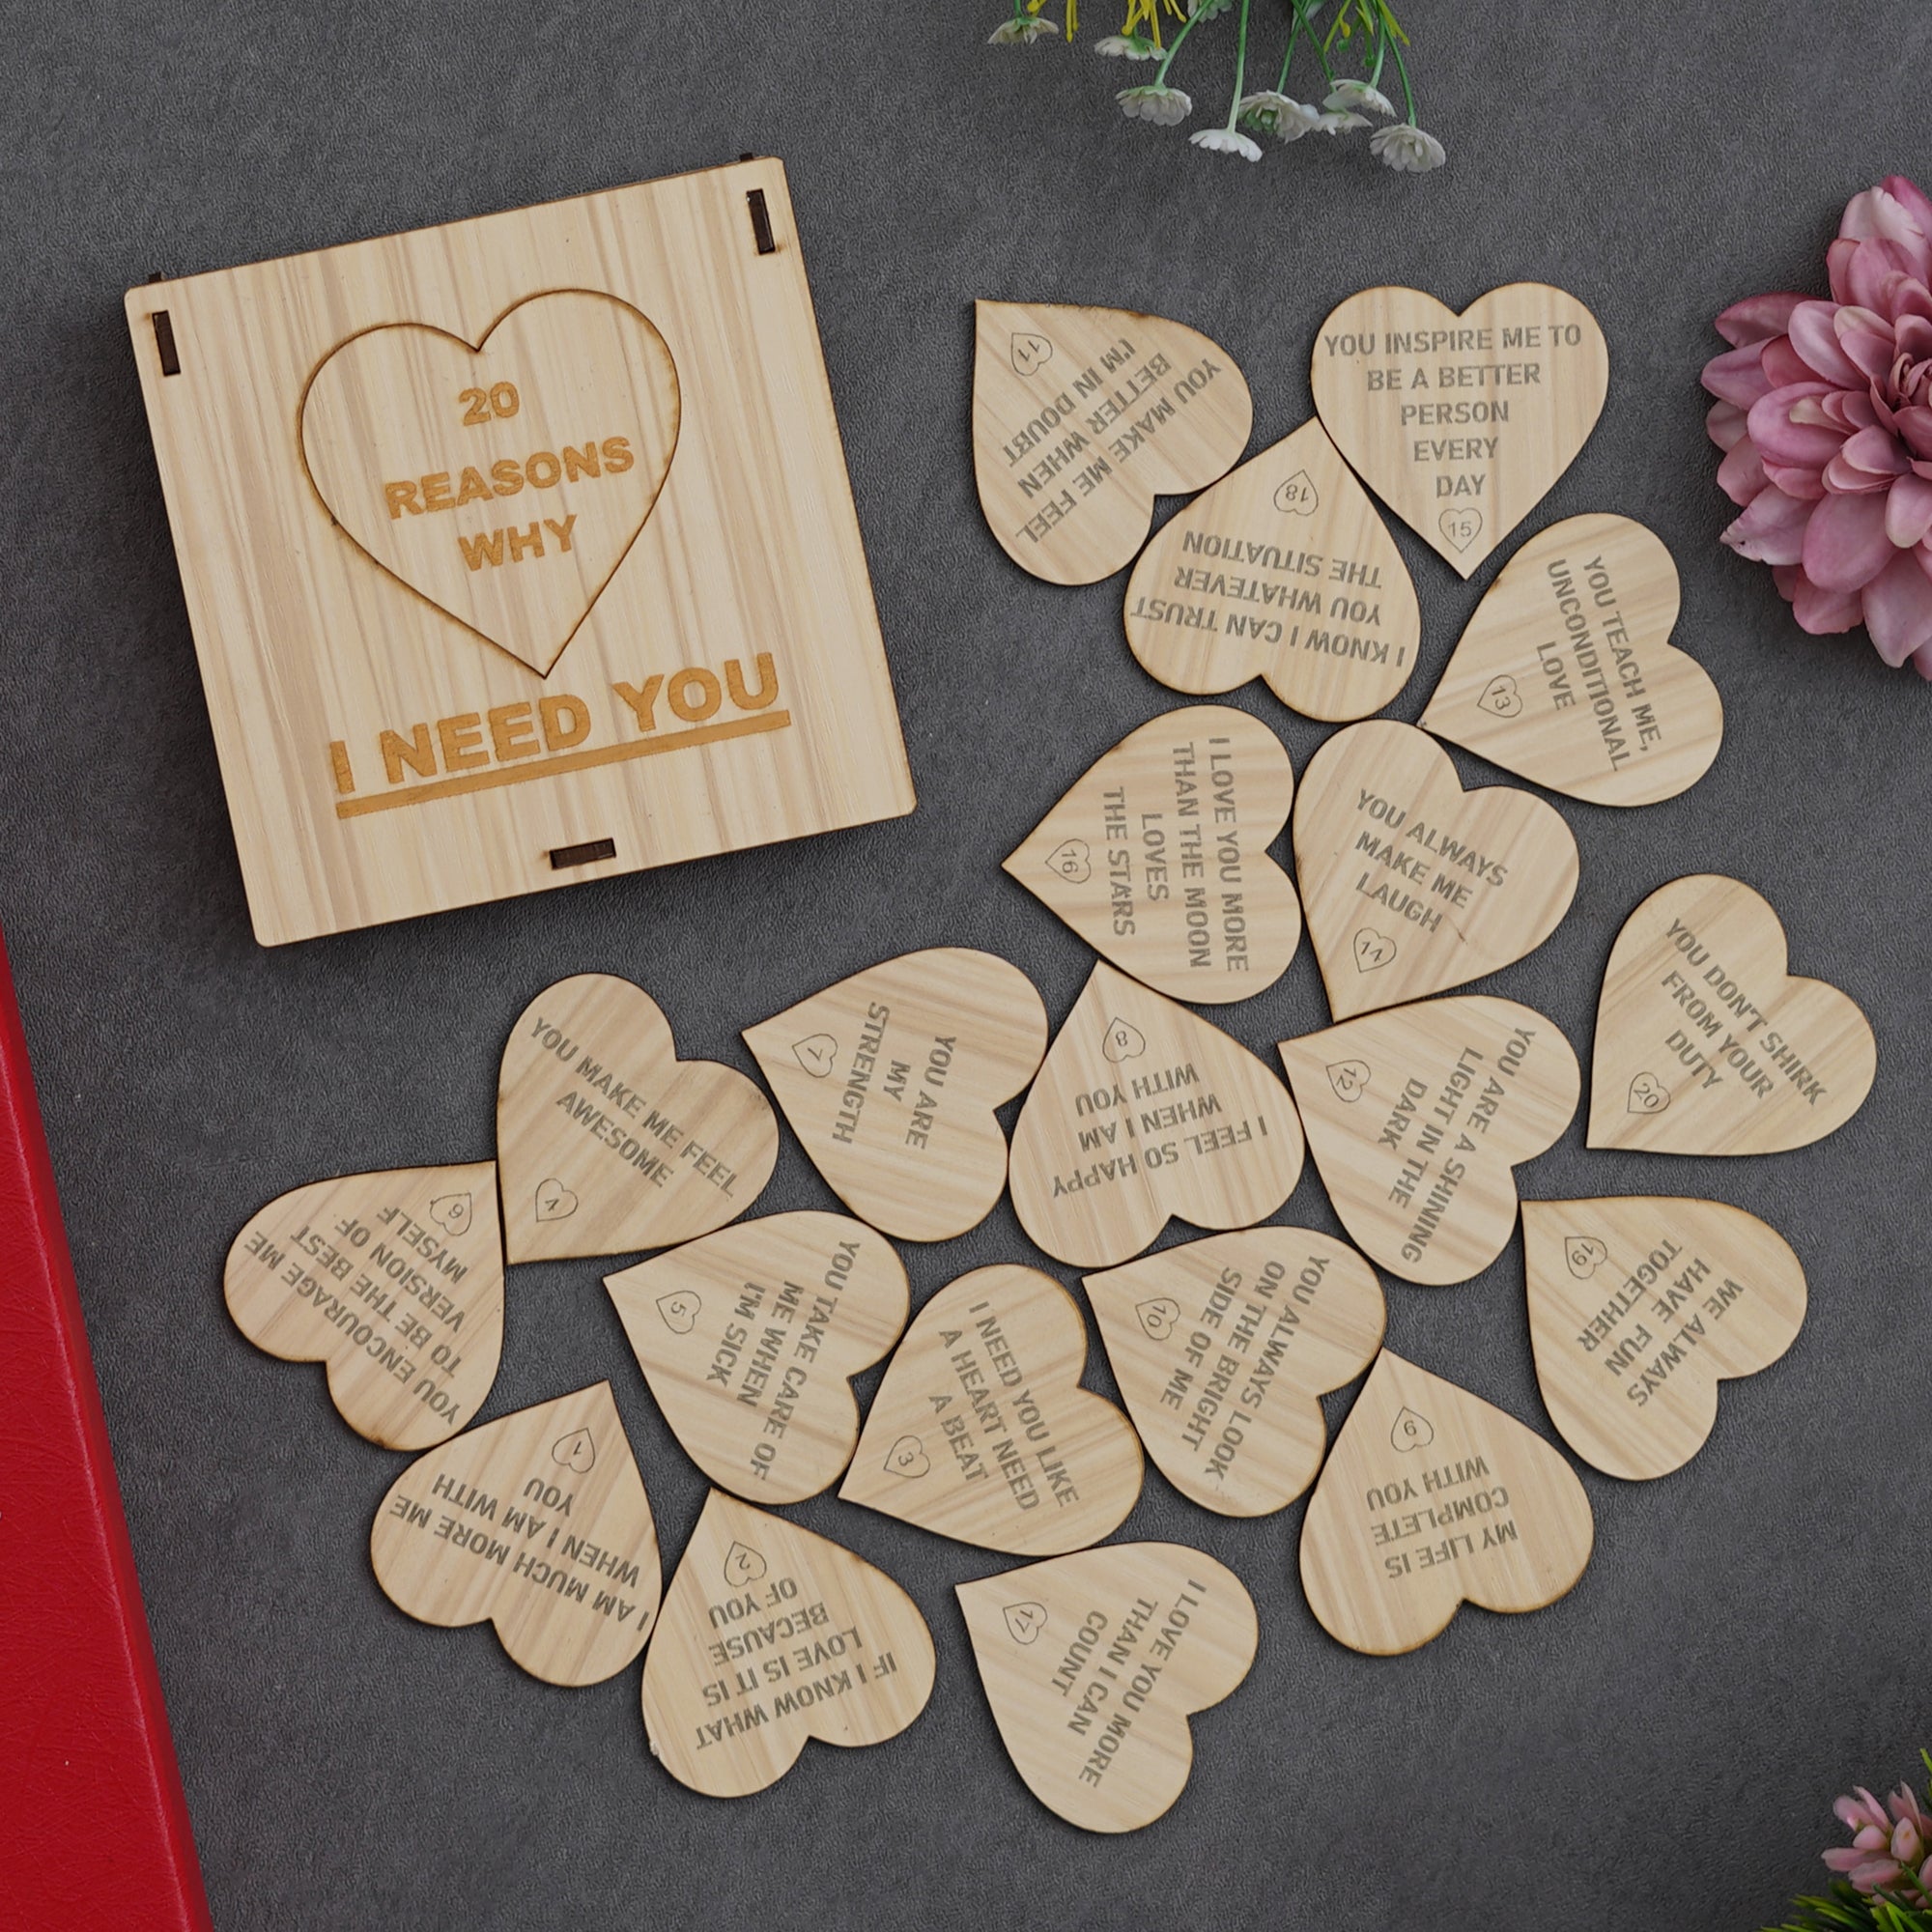 Valentine Combo of Pack of 8 Love Gift Cards, "20 Reasons Why I Need You" Printed on Little Hearts Wooden Gift Set, Red Roses Bouquet and White, Red Teddy Bear Valentine's Rectangle Shaped Gift Box 3